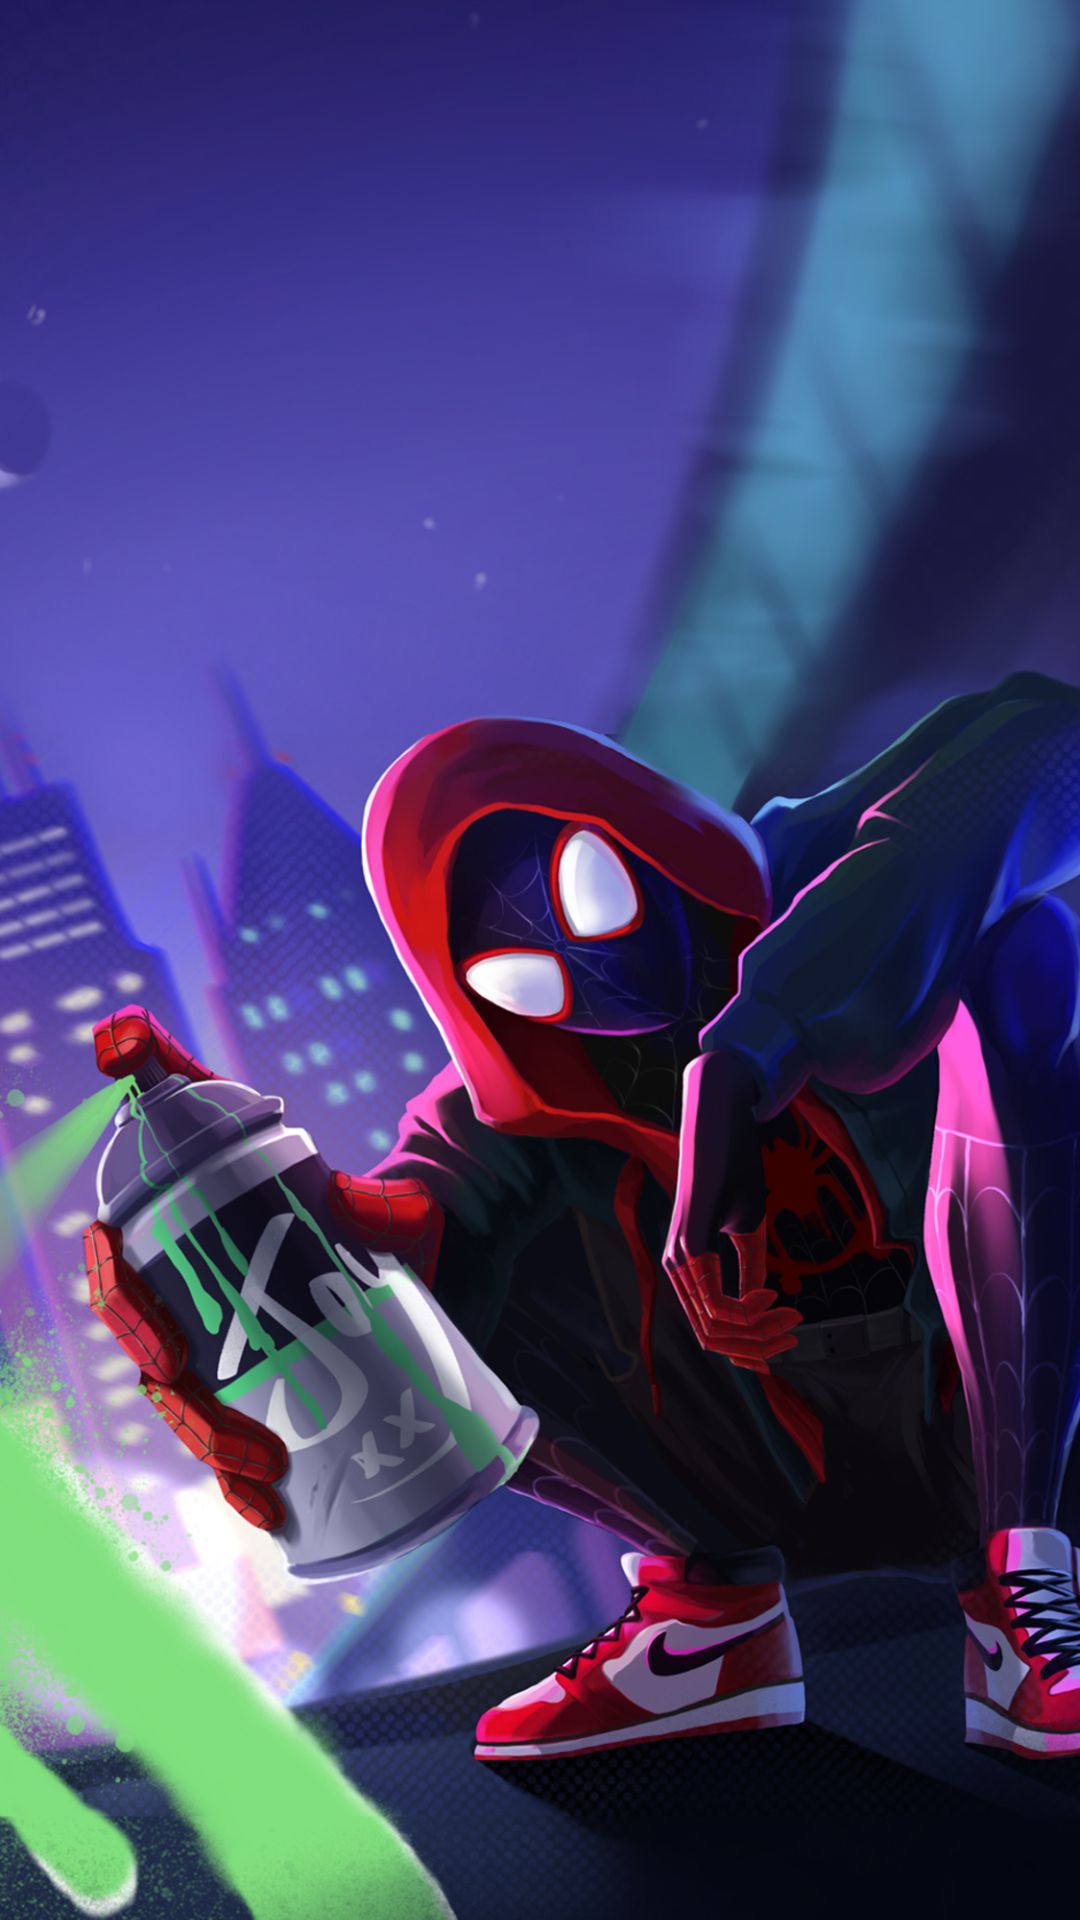 Miles Morales Wallpapers - Top 35 Best Miles Morales Backgrounds Download